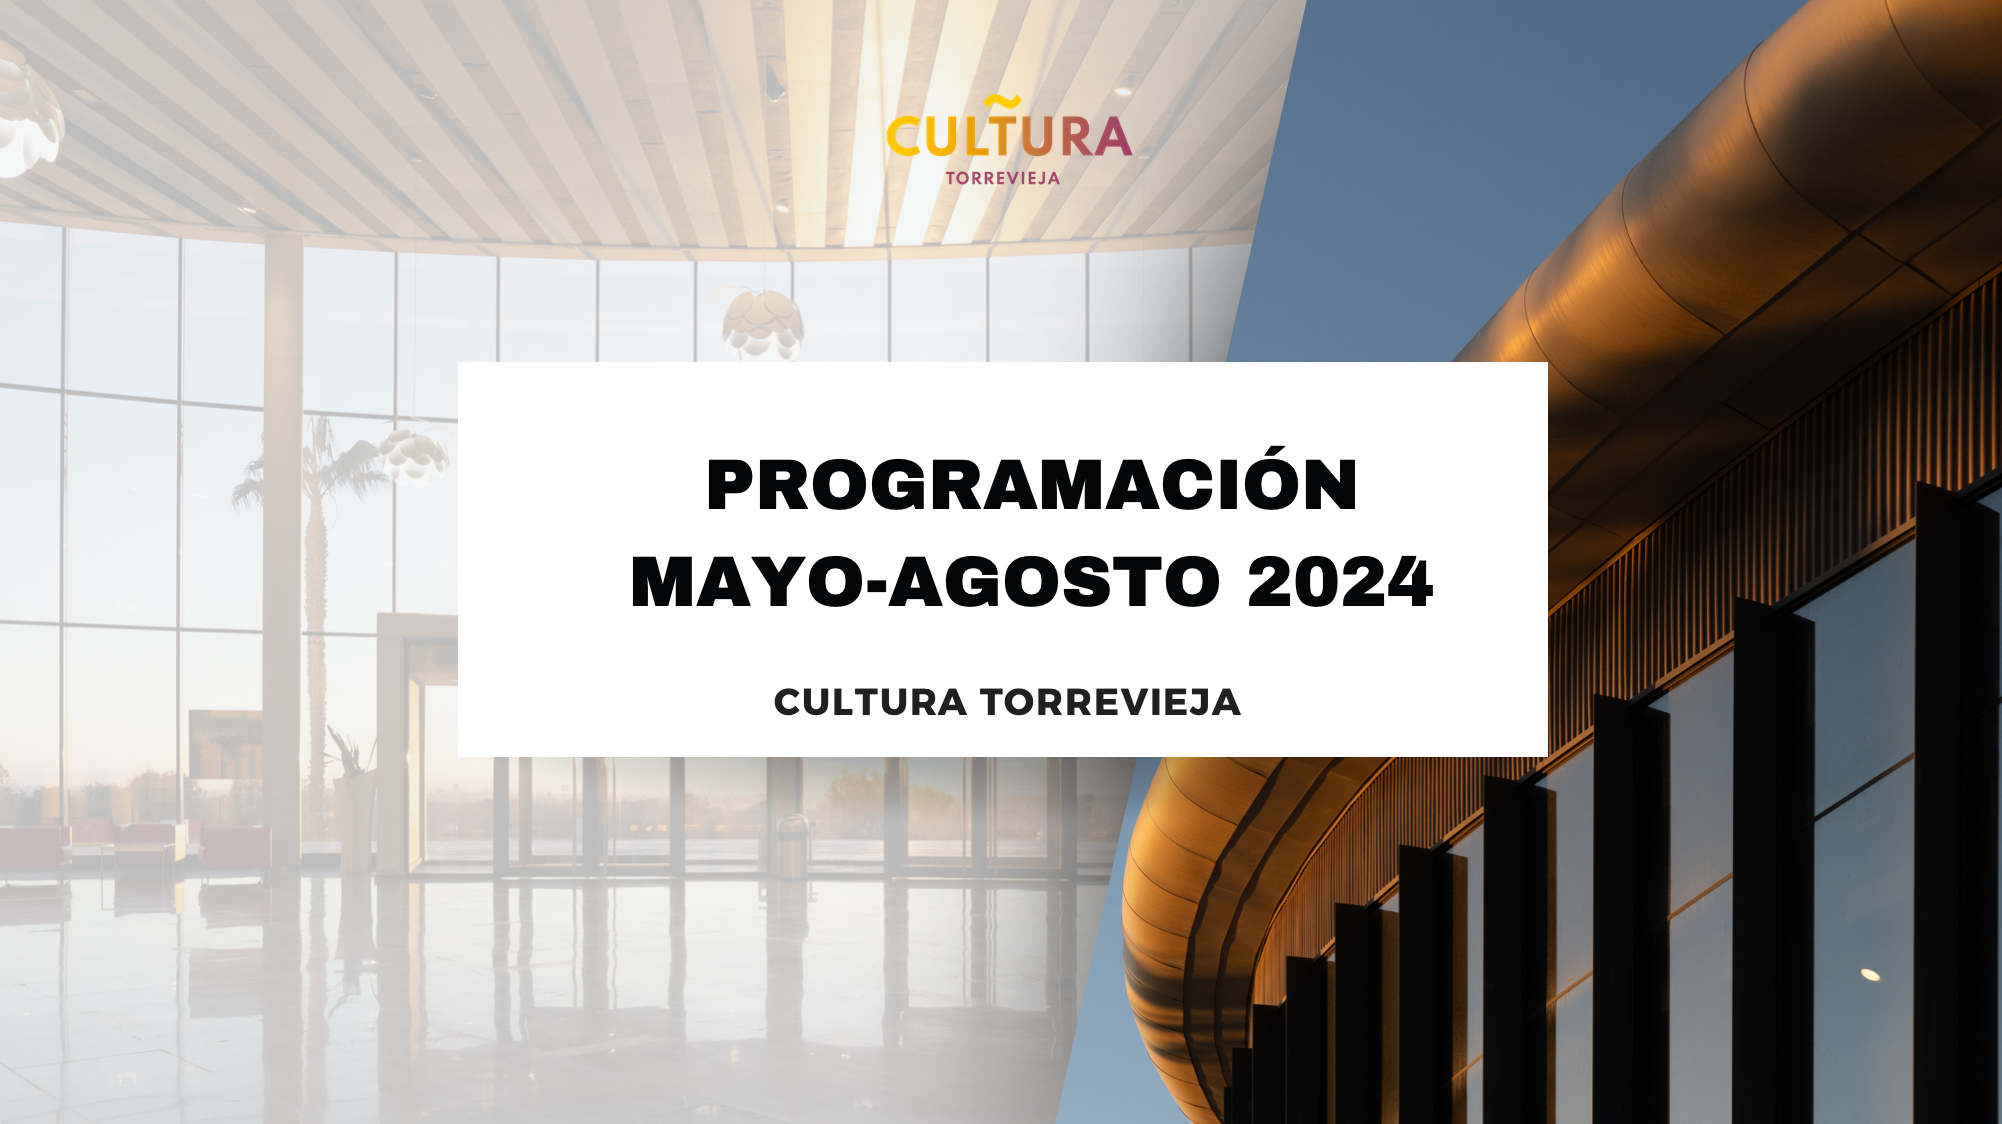 A summer full of emotions: the new cultural program has been announced in Torrevilla